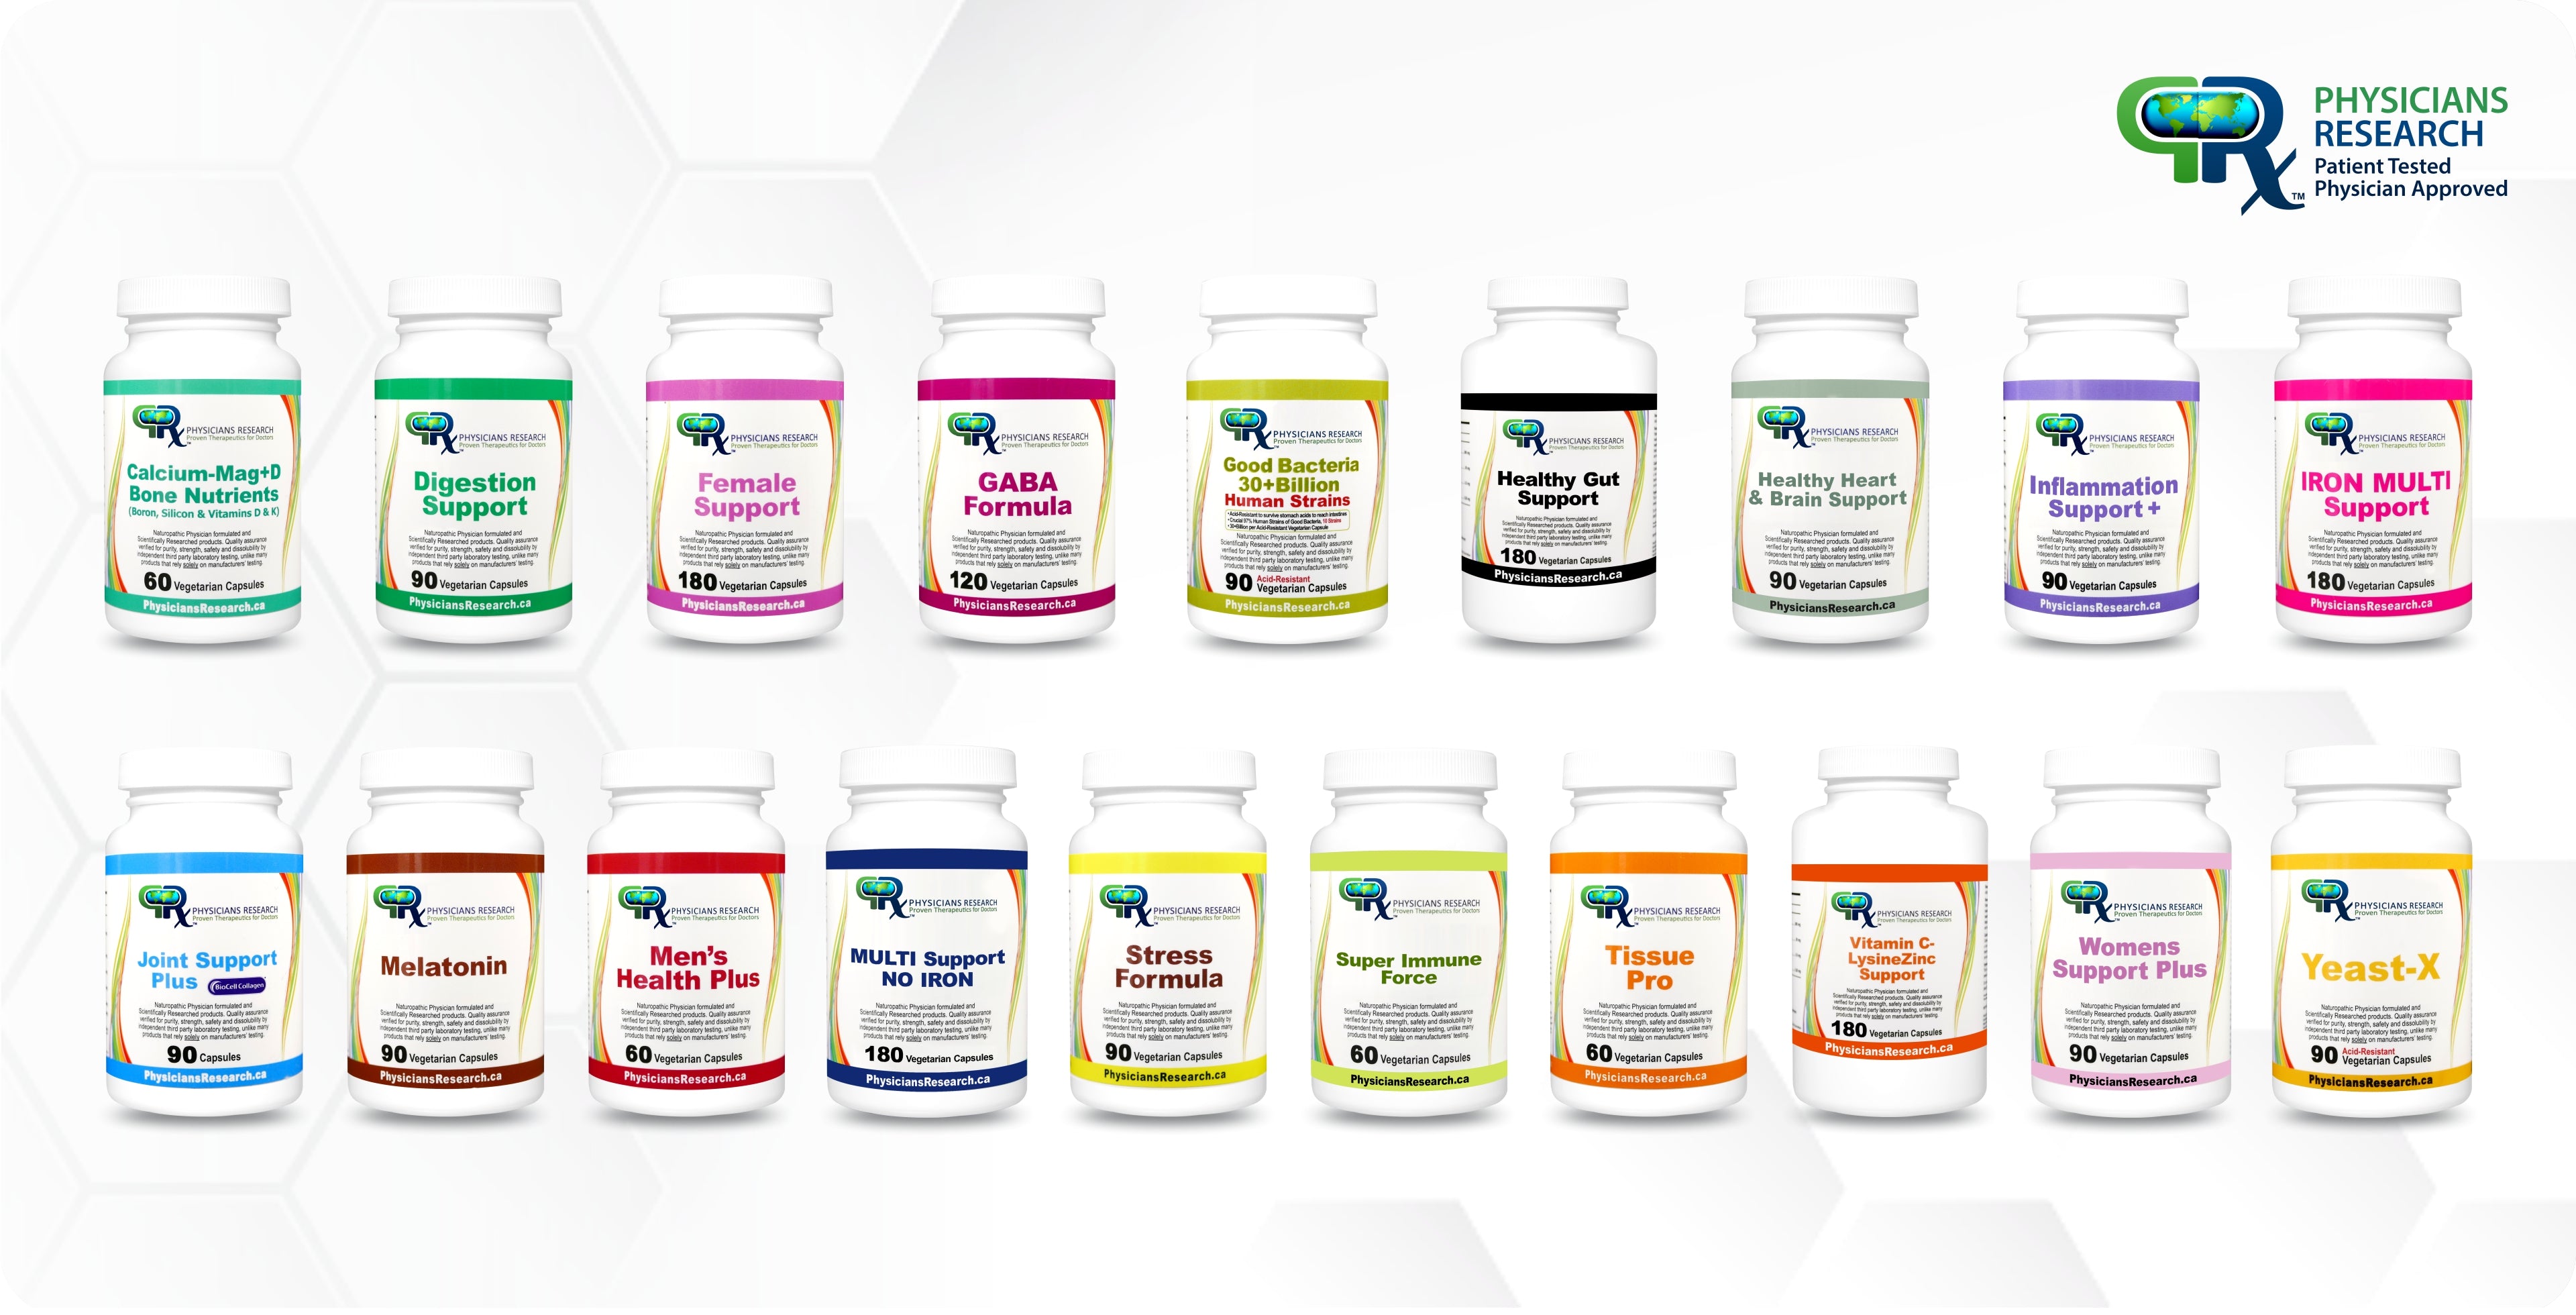 Physicians Research Product Line